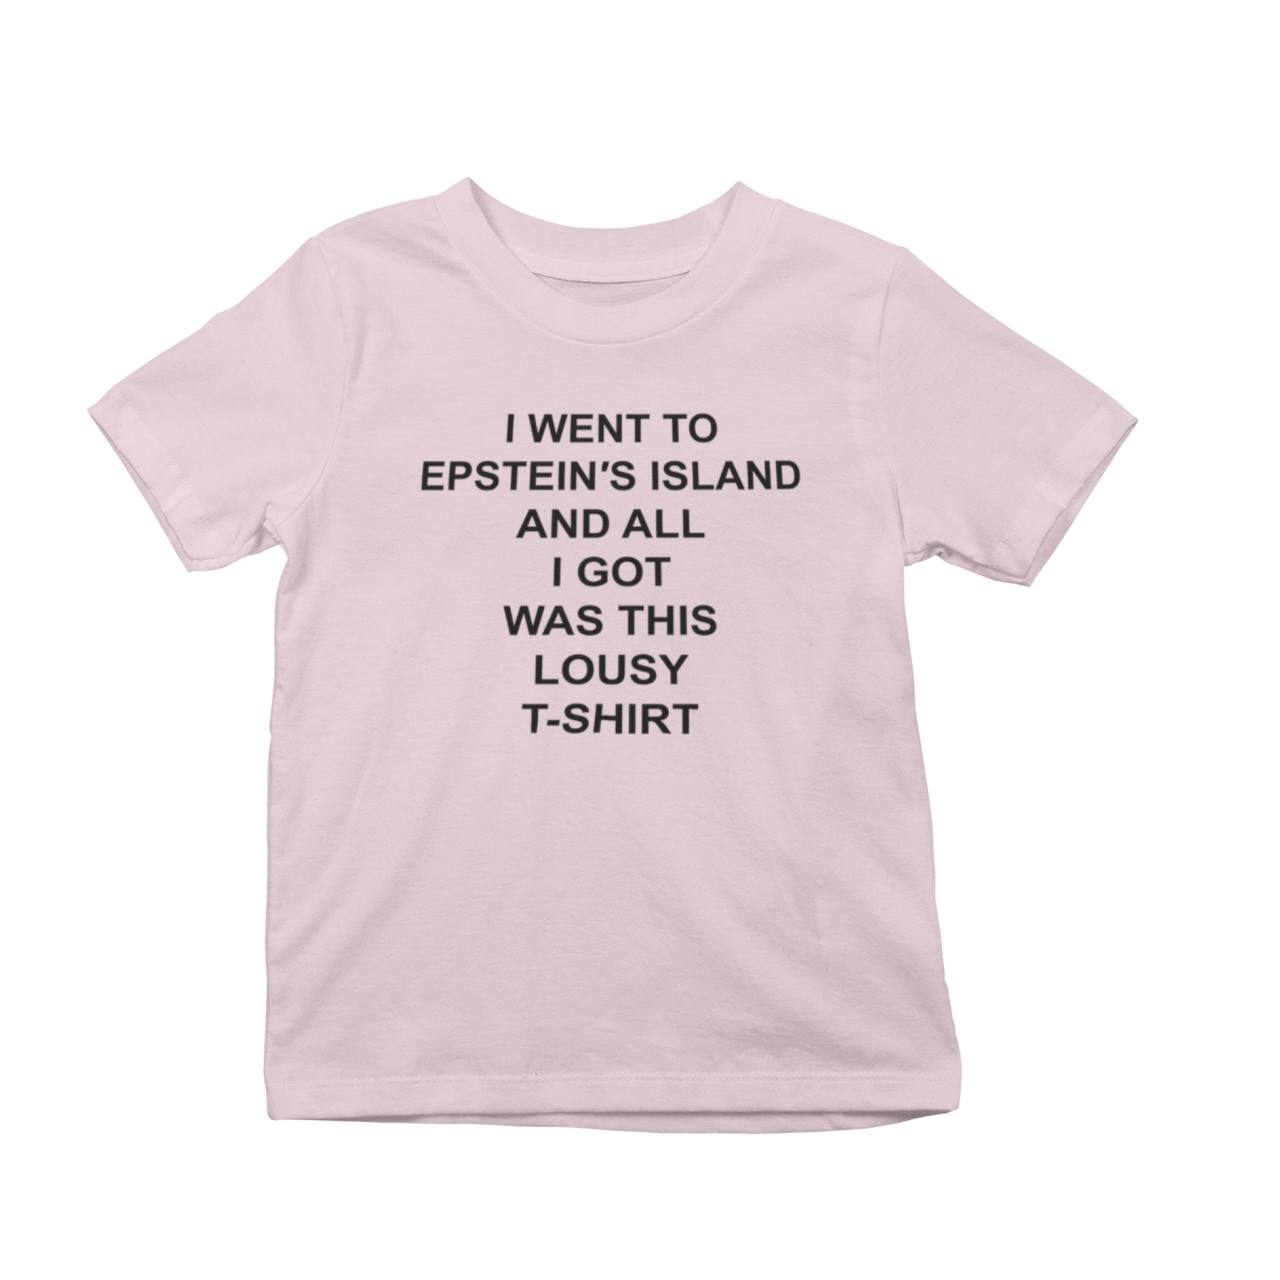 I Went To Epstein’s Island And All I Got Is This Lousy T-Shirt